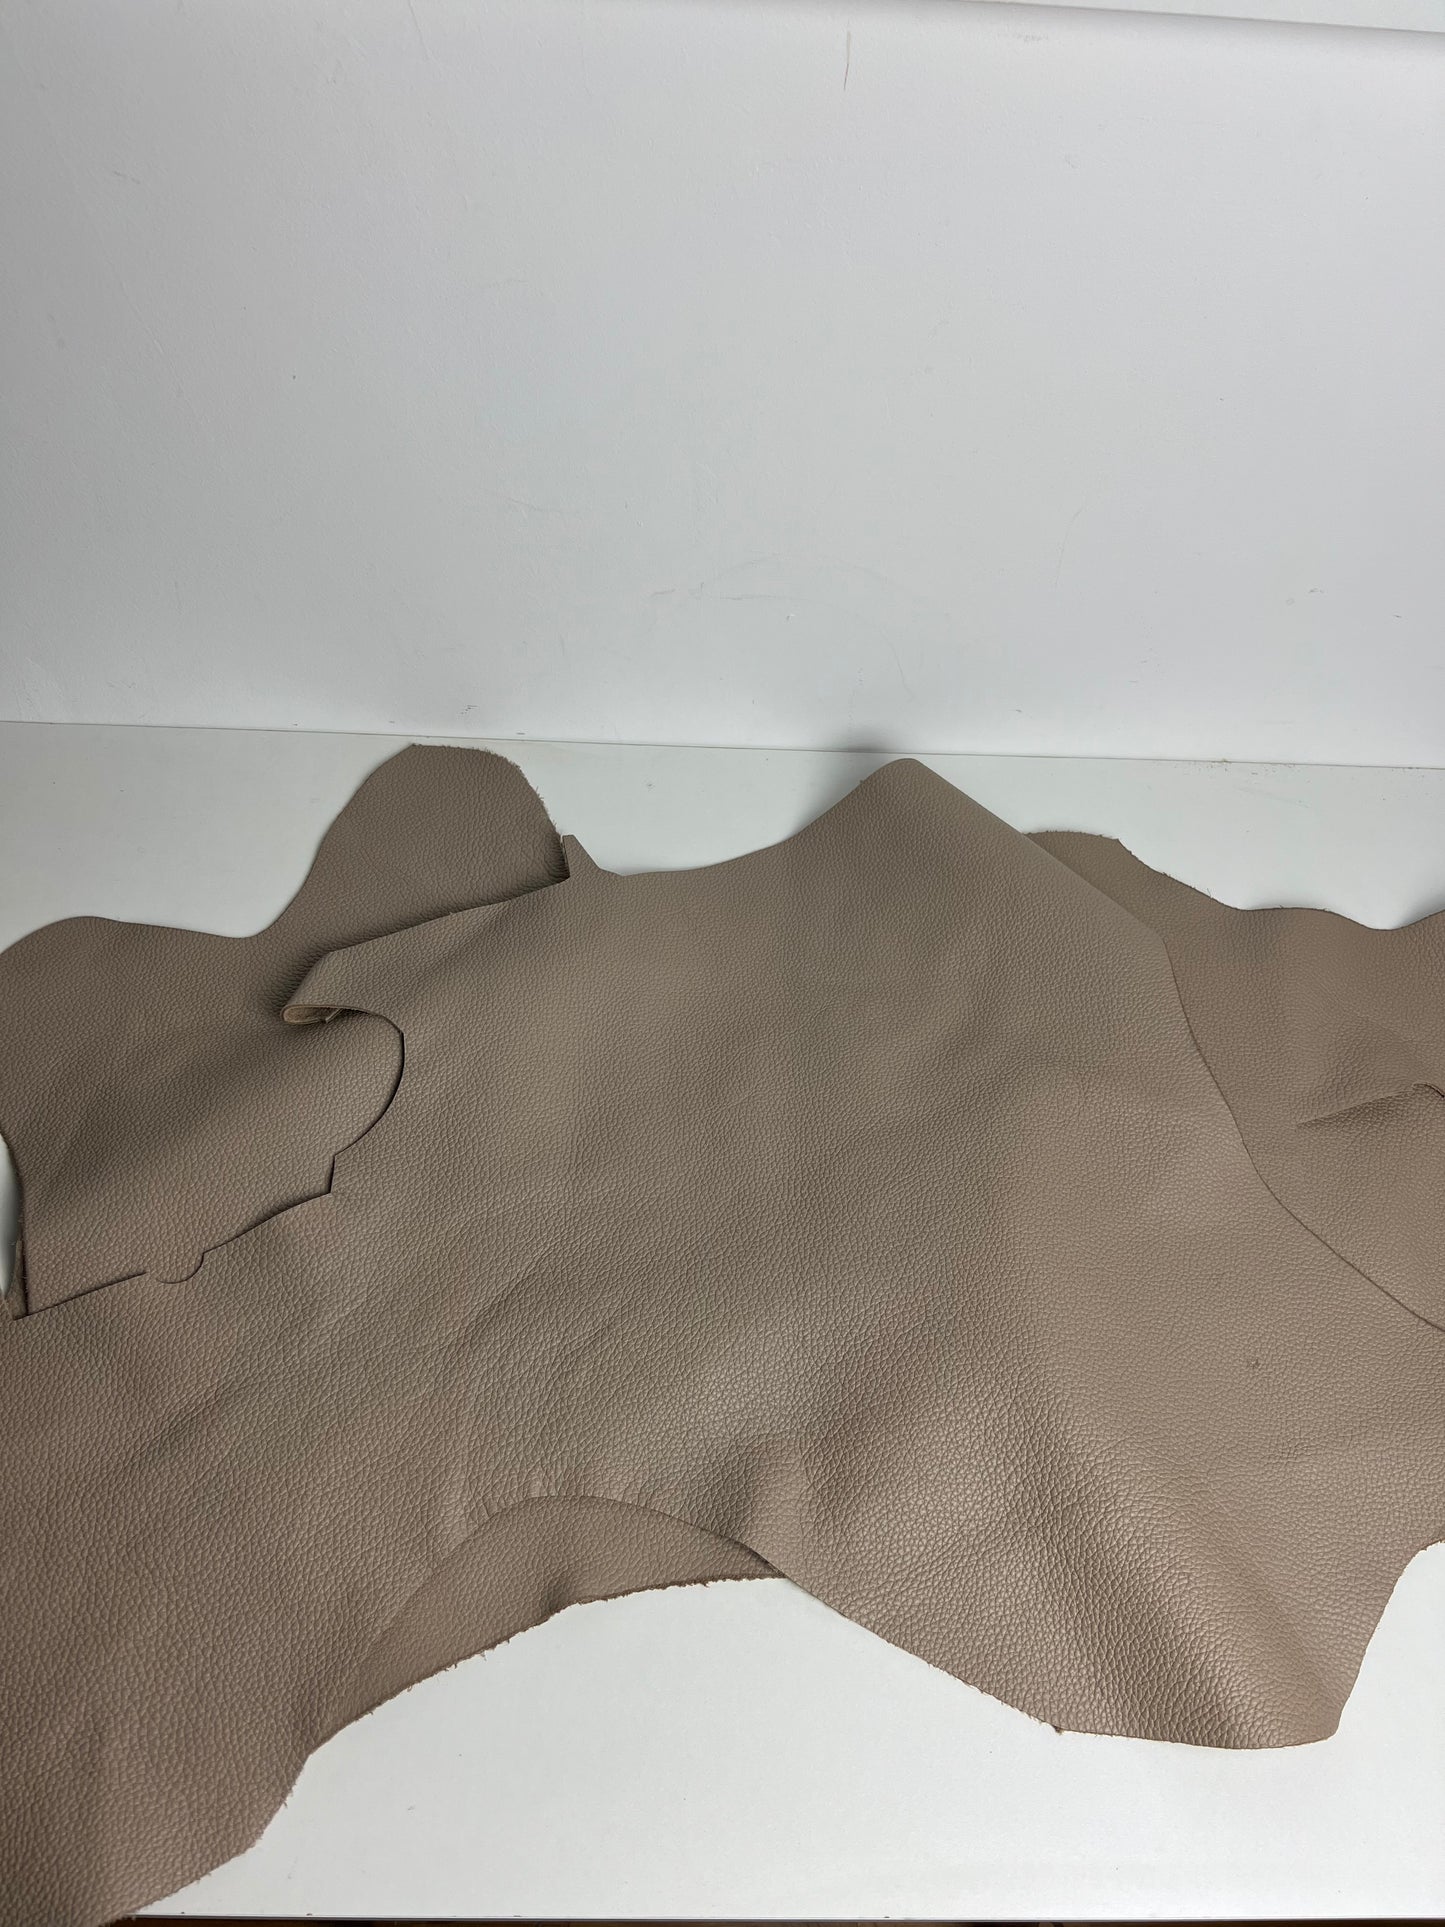 Pieces of Leather, Medium and Large pieces, Color Beige, Cow, Nice finish look | 0.8 kg  | 1.8 lb